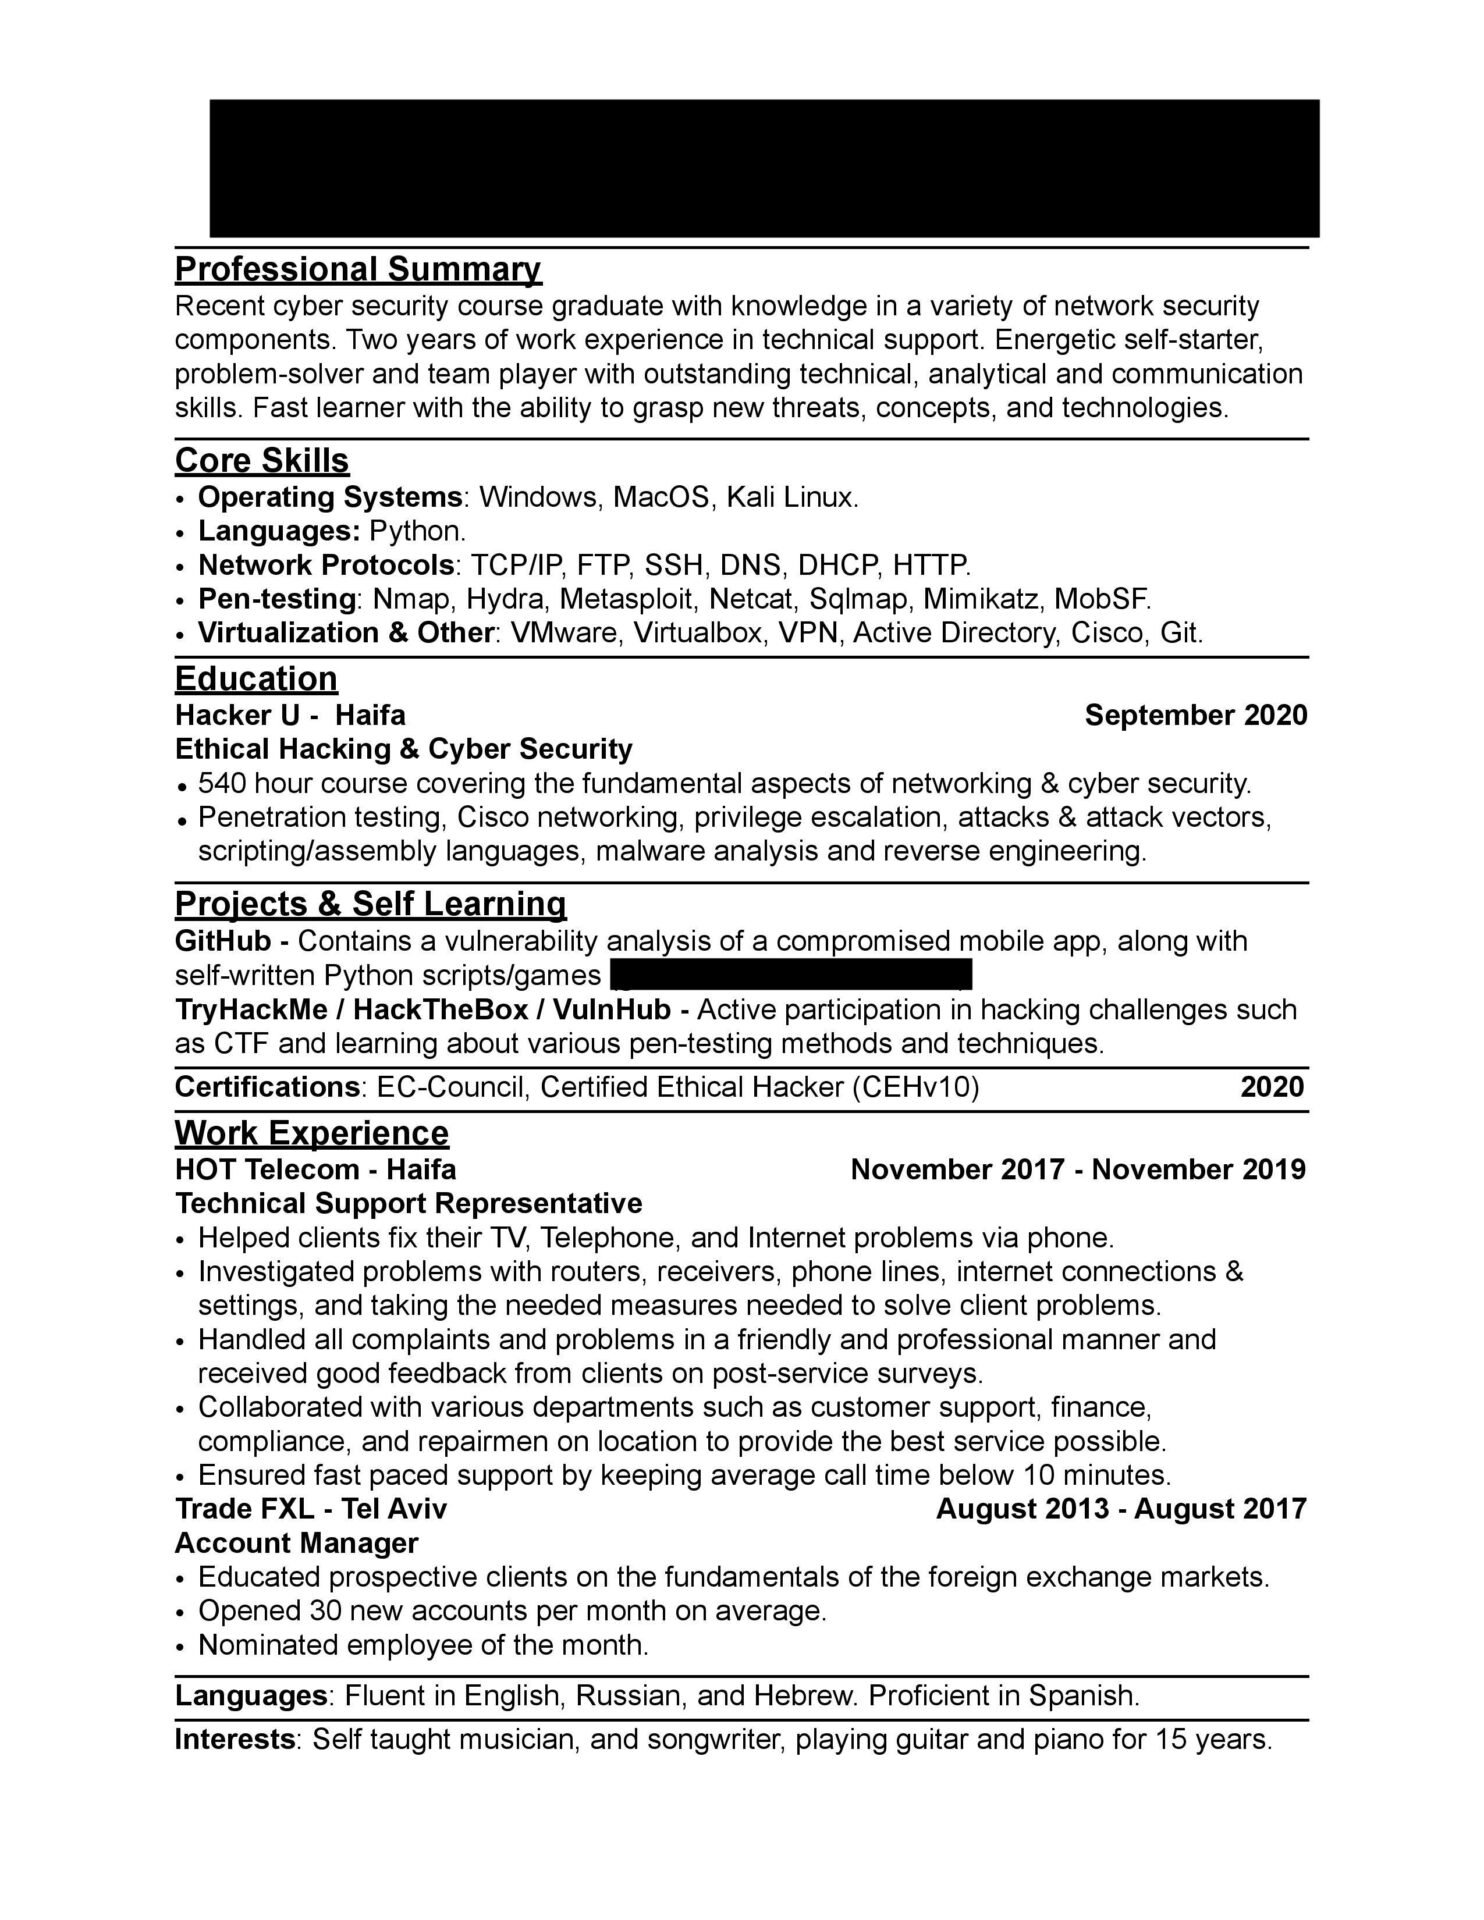 cyber security resume with no experience reddit